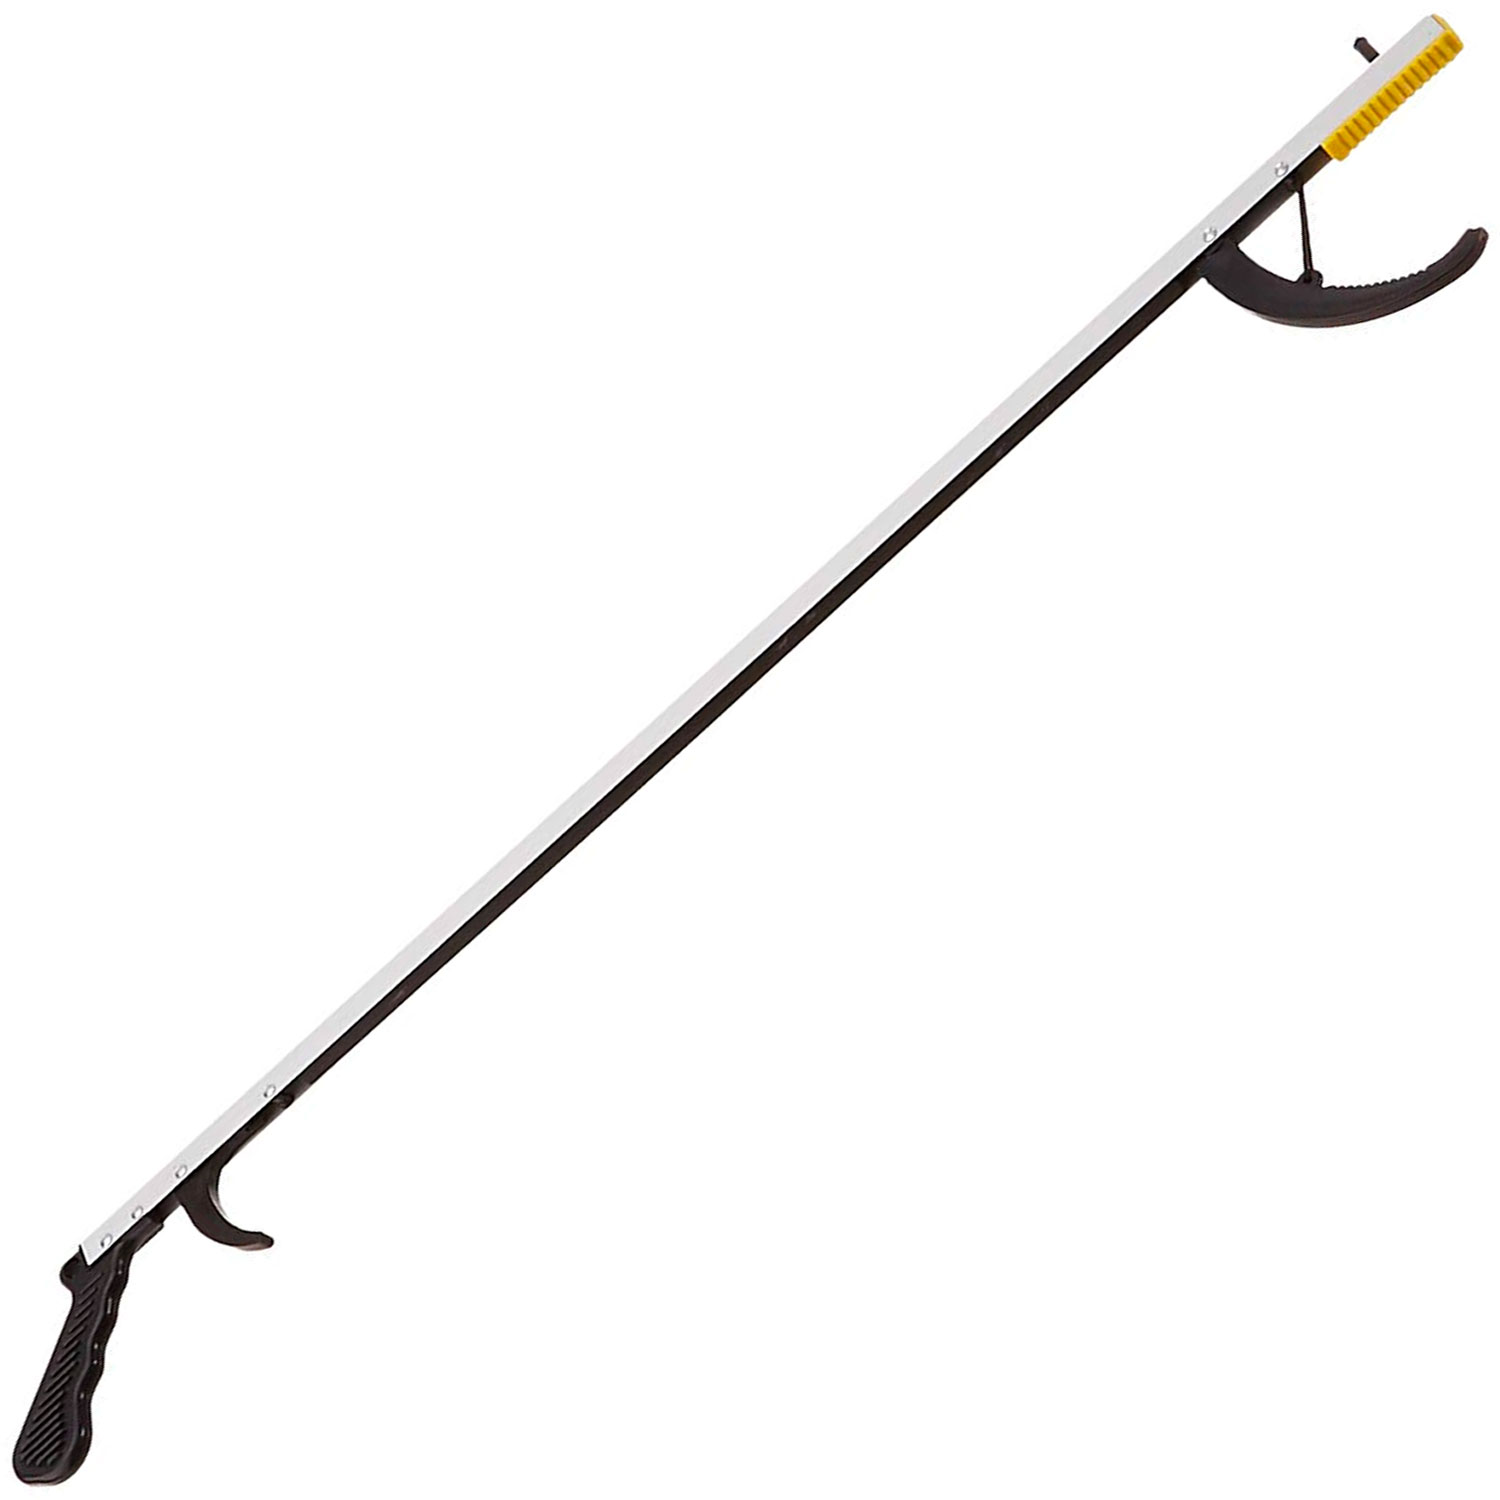 DMI Reacher Grabber Tool for Elderly, Disabled or After Surgery Recovery, Claw Grabber, Reaching Assist Tool, Trash Picker, Hand Gripper, Arm Extension, 26 Inches, Non Folding, Magnetic Claw - image 1 of 6